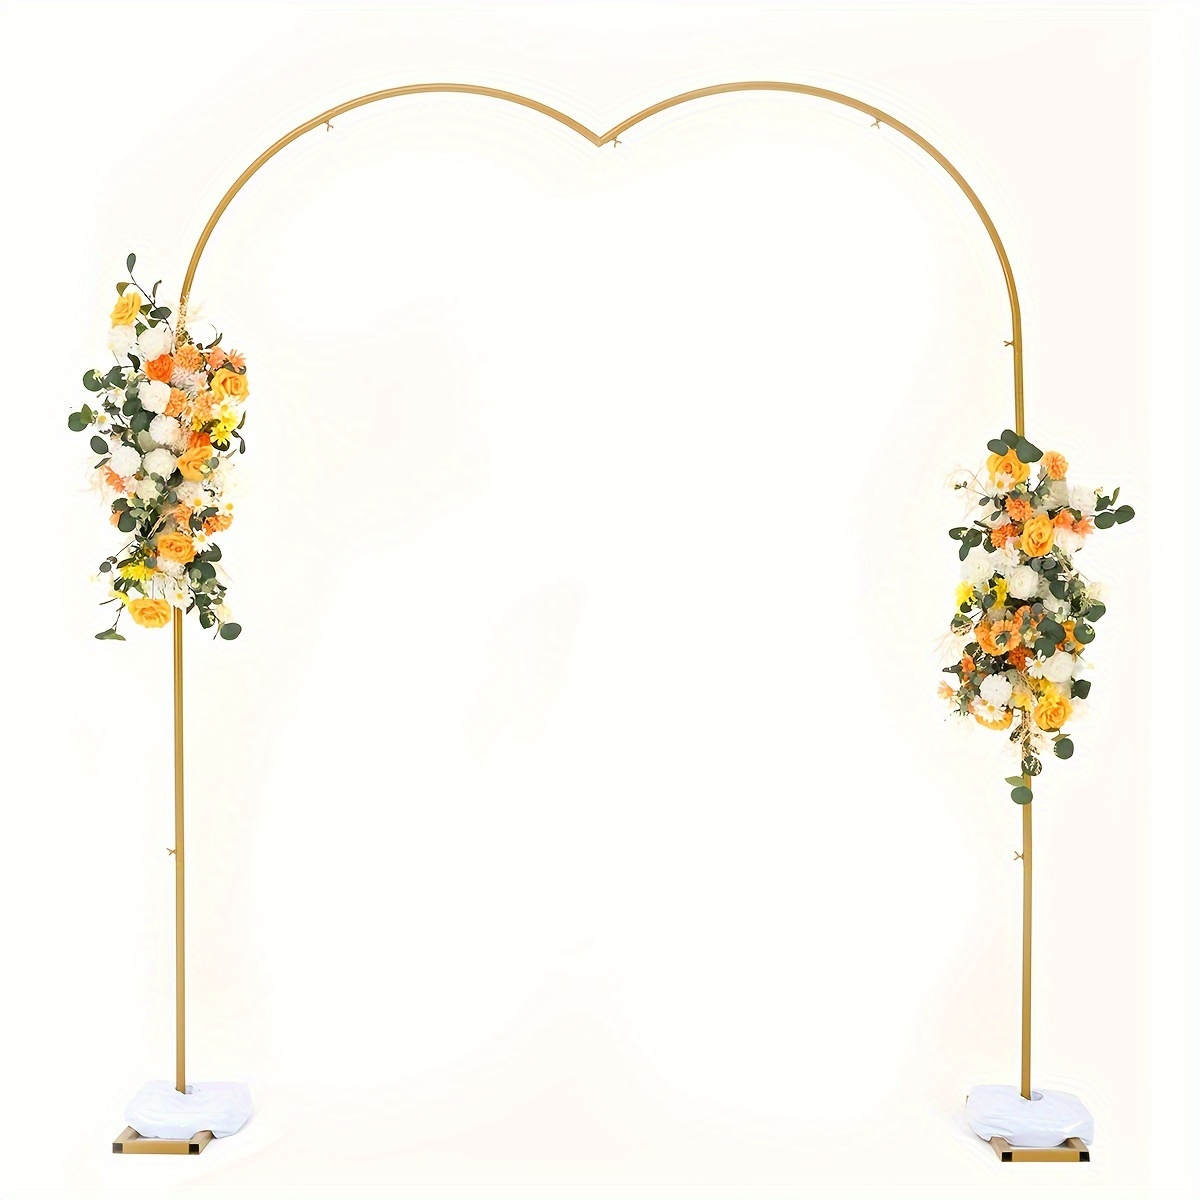 

7.87*7.87 Ft Metal Wedding Arch Backdrop Stand, Gold Balloon Arch Stand For Anniversary Birthday Party Valentine Ceremony Wedding Decorations